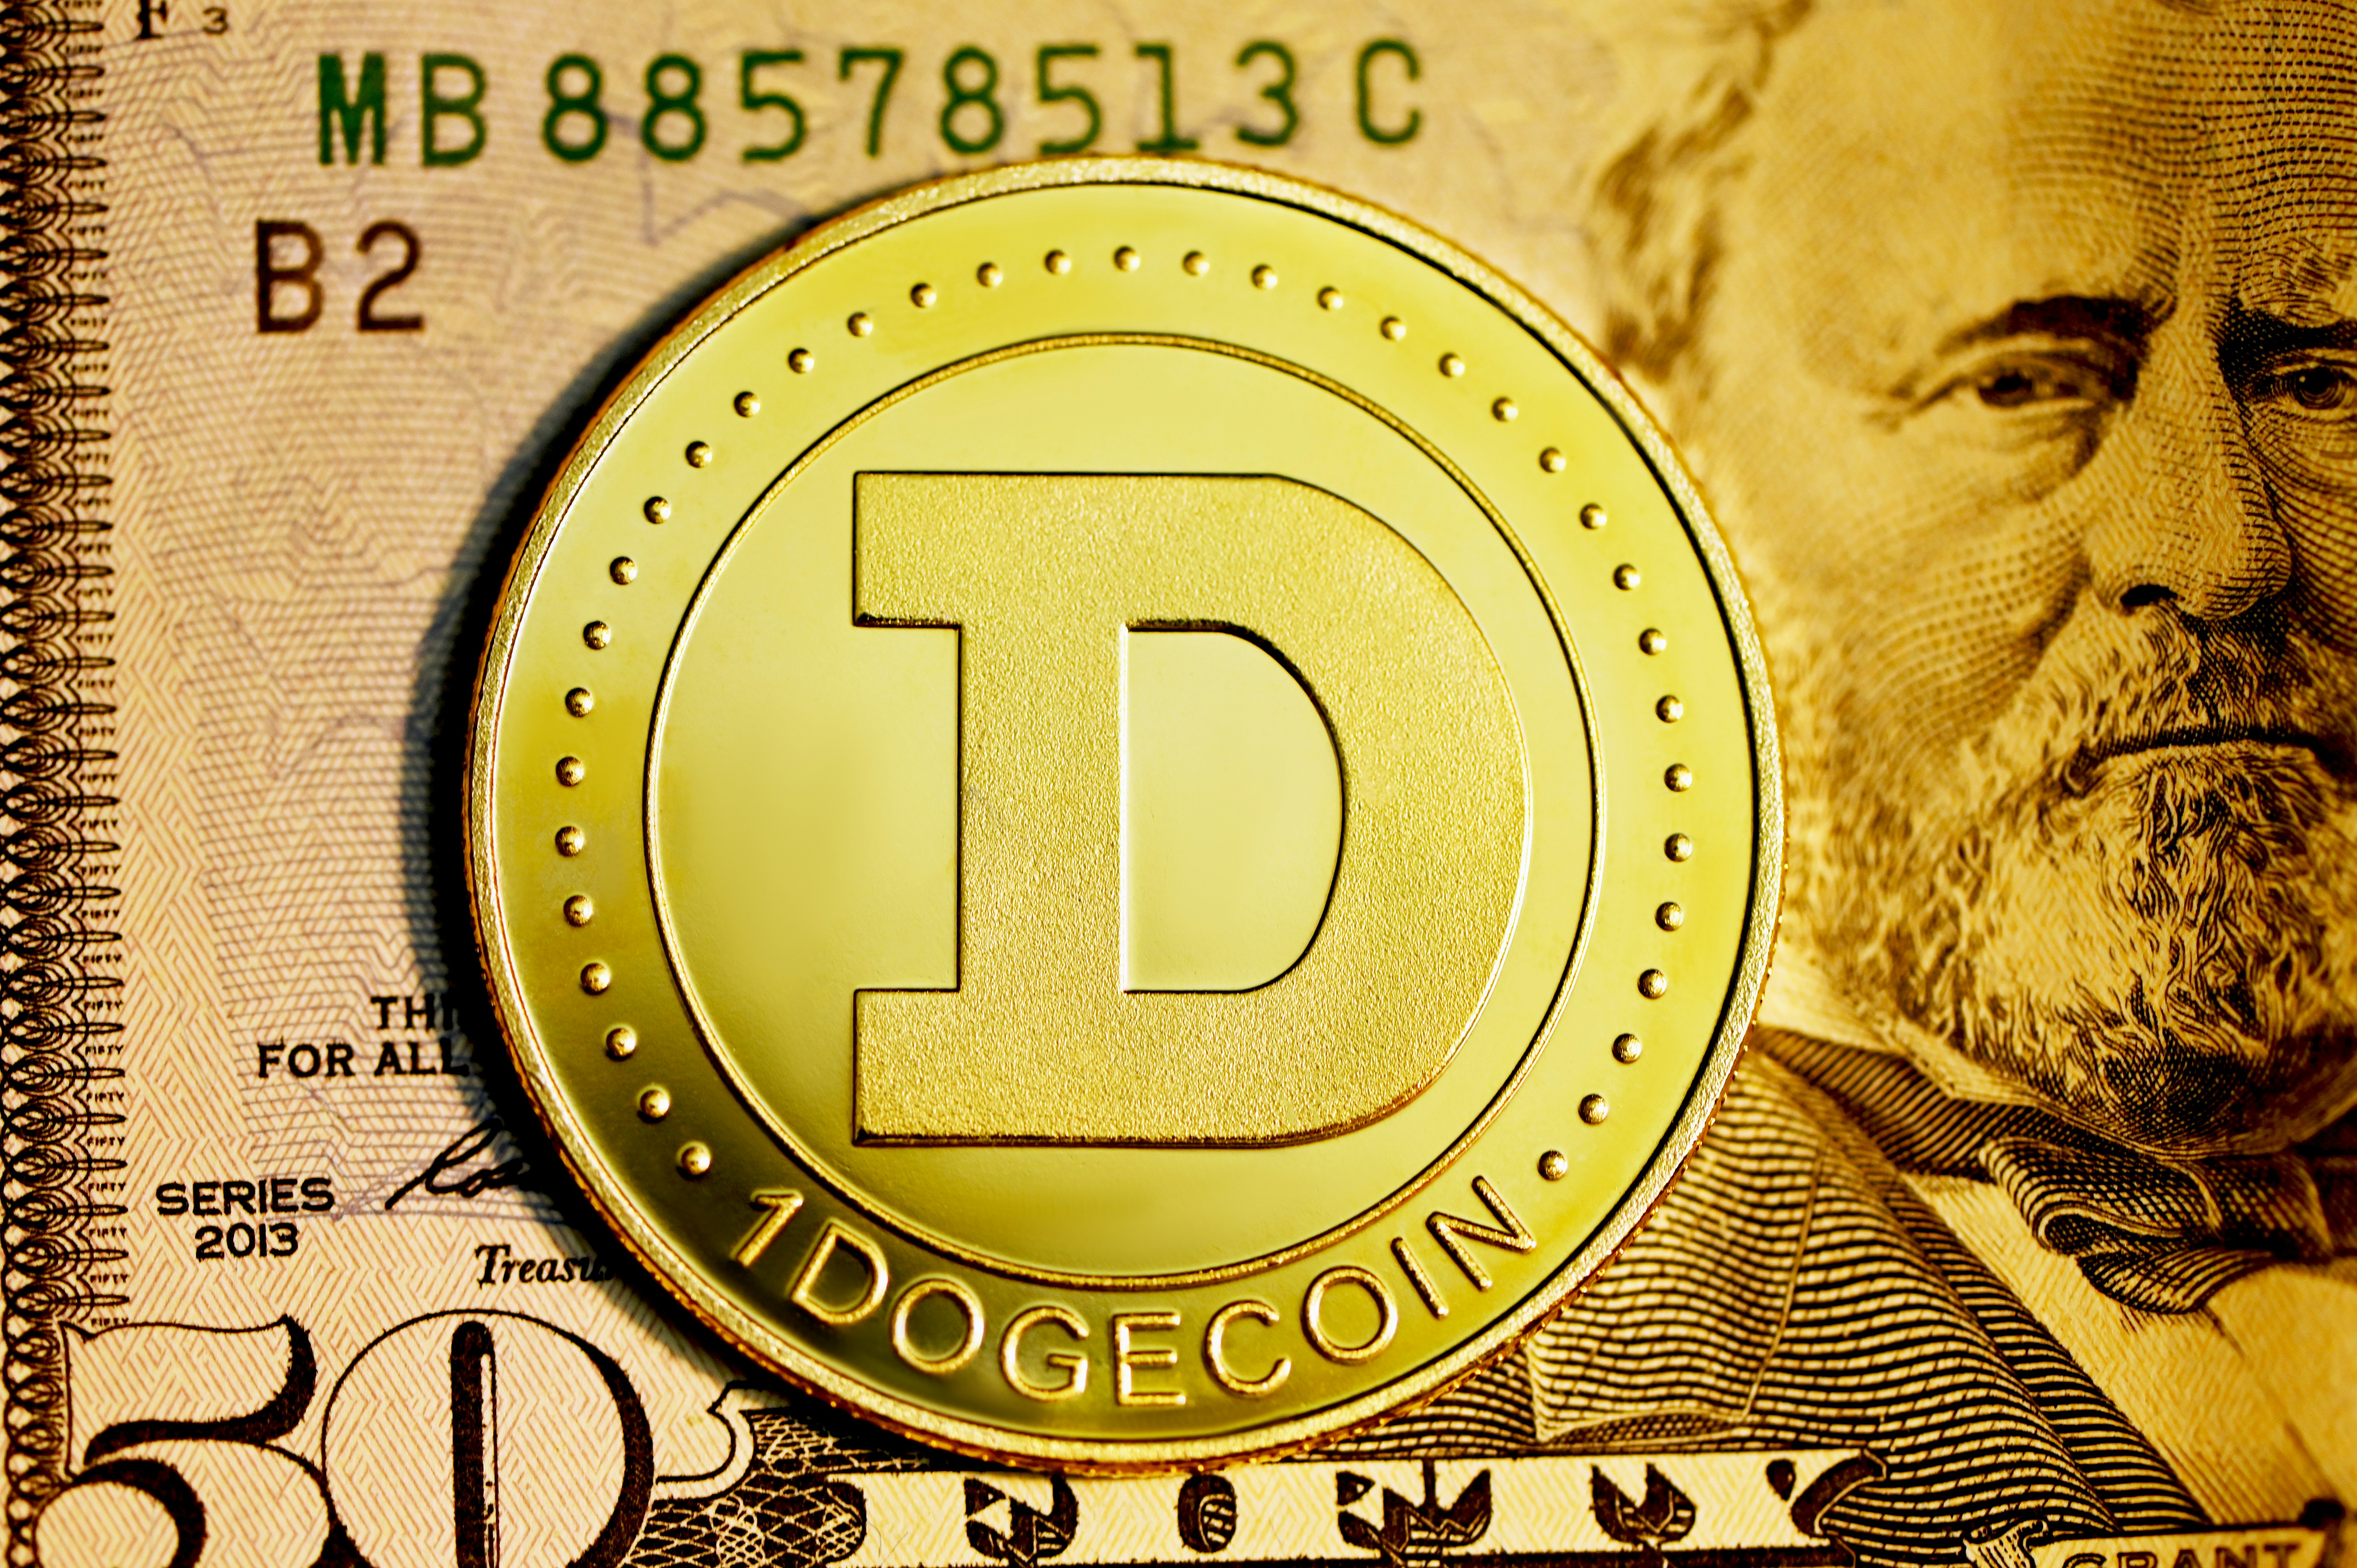 A single Dogecoin on top of a $50 bill